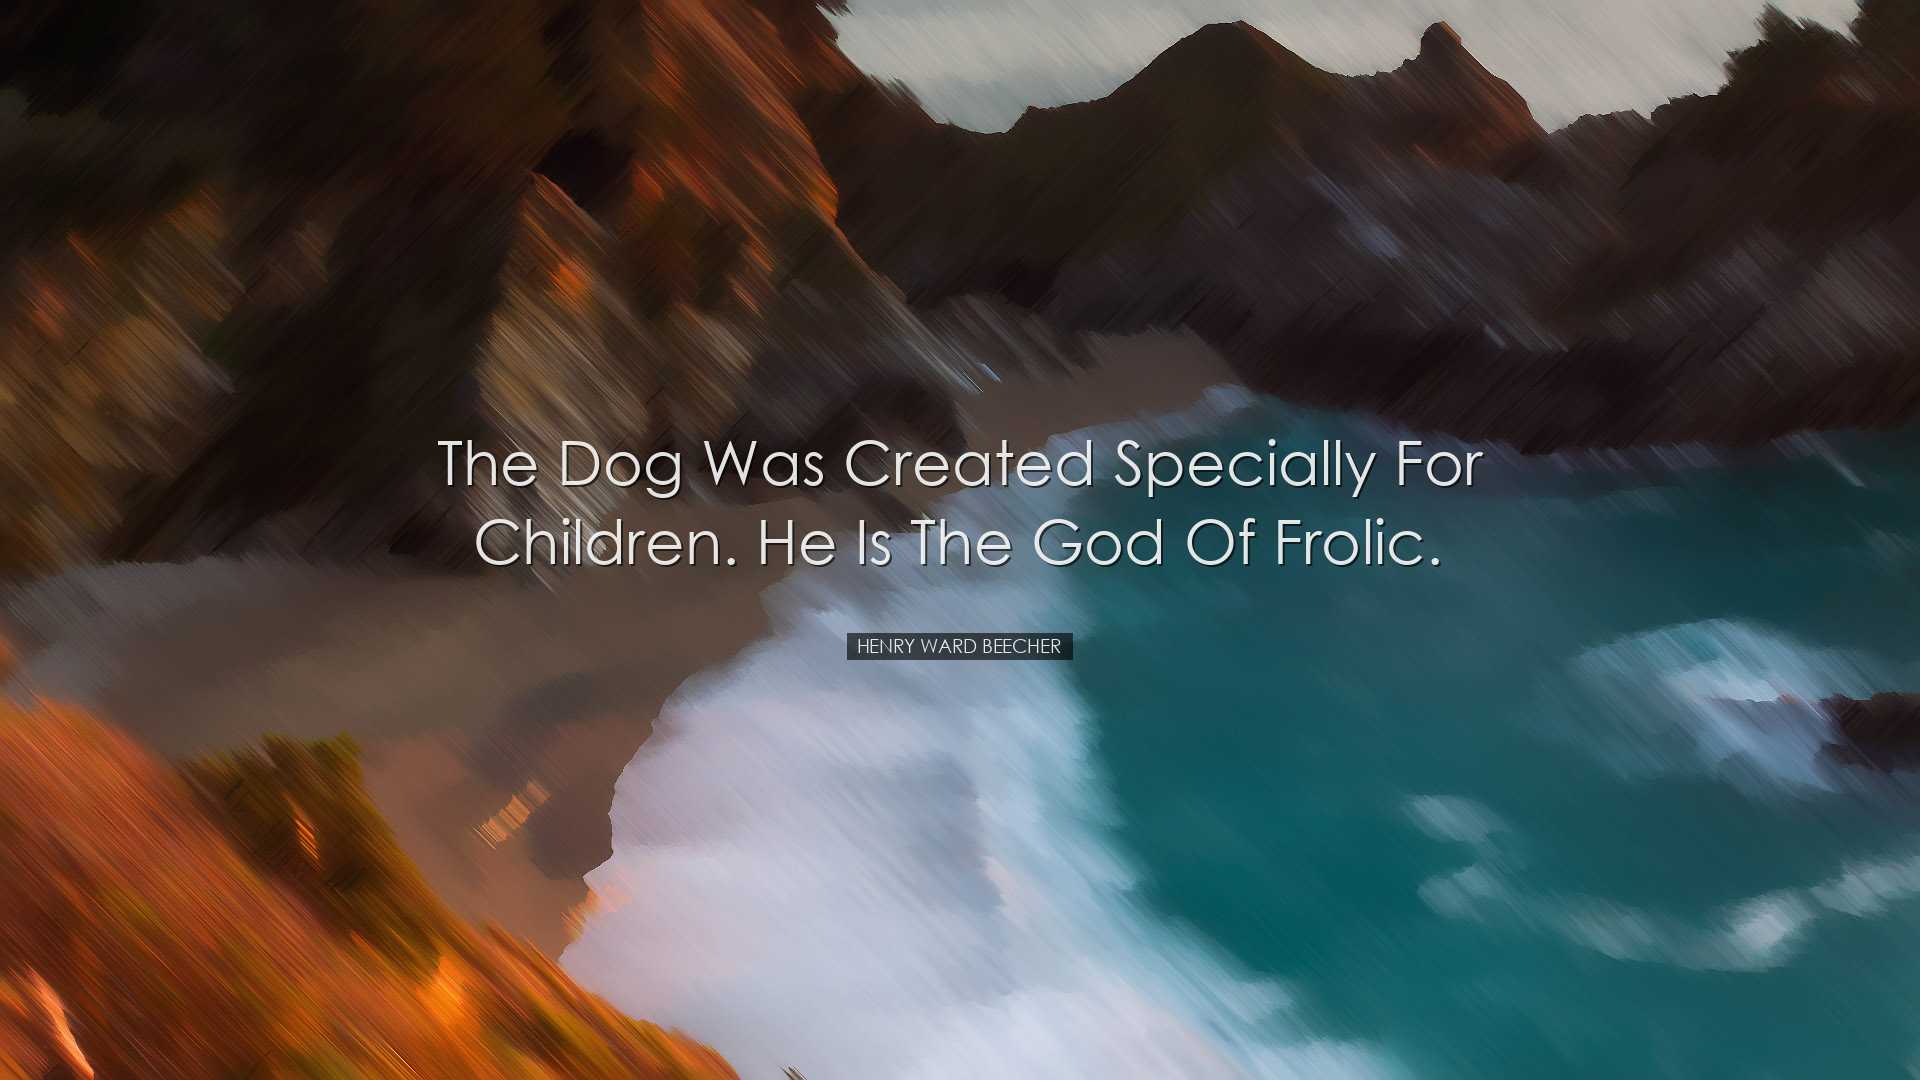 The dog was created specially for children. He is the god of froli